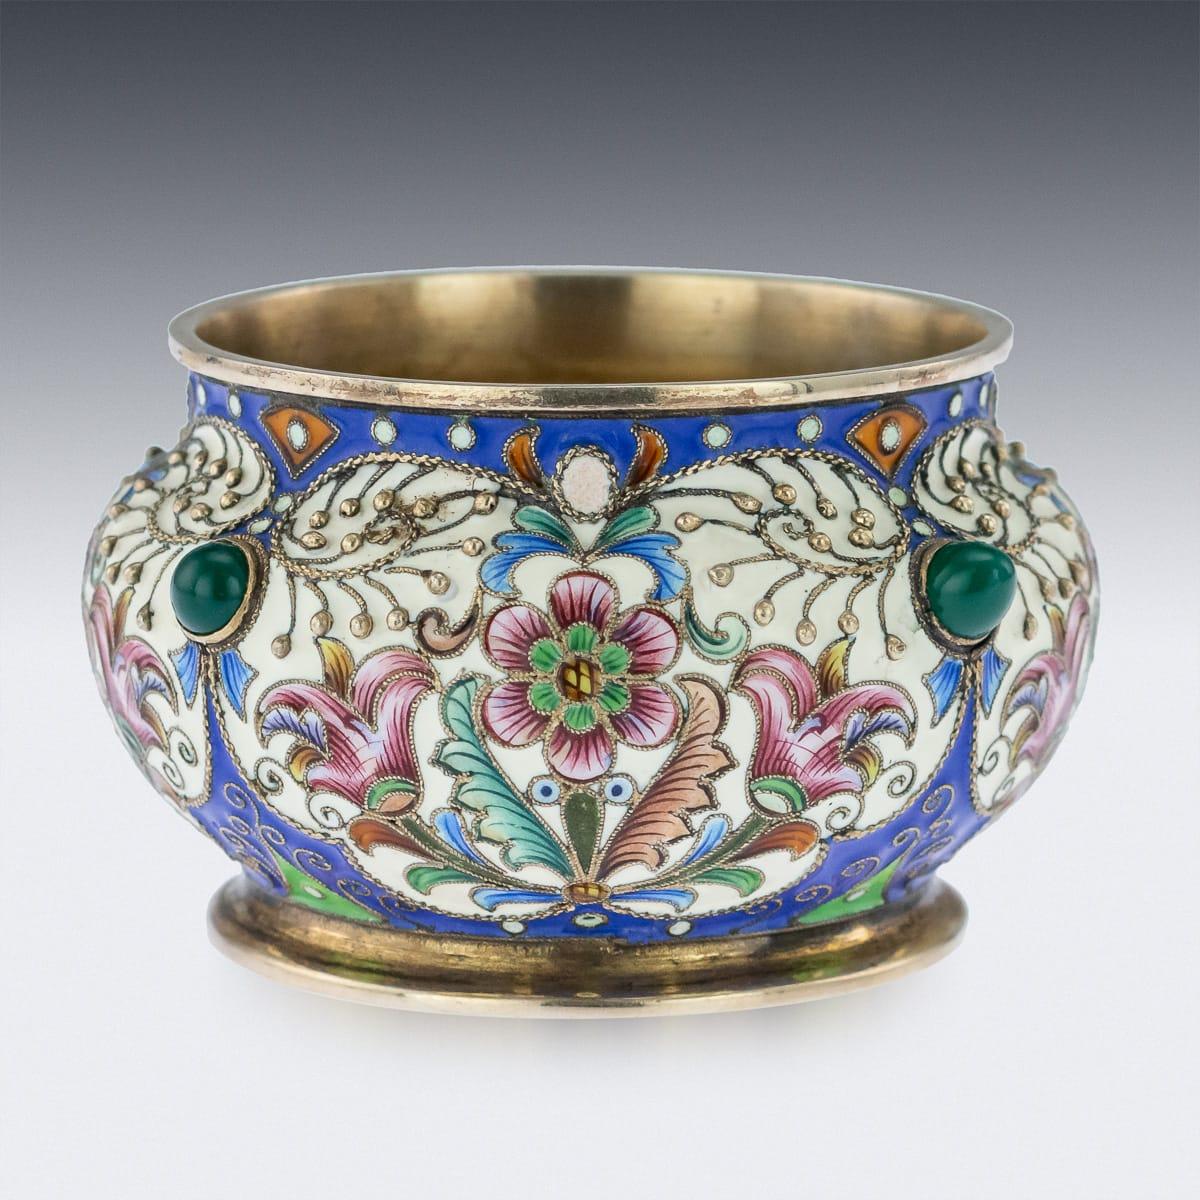 Antique late 19th century Imperial Russian solid silver and cloisonné enamel salt, of traditional shape, decorated with foliate forms with shaded reds, greens, blues, gentle pink and white enamels on gilded matted ground, set with cabochon emeralds.